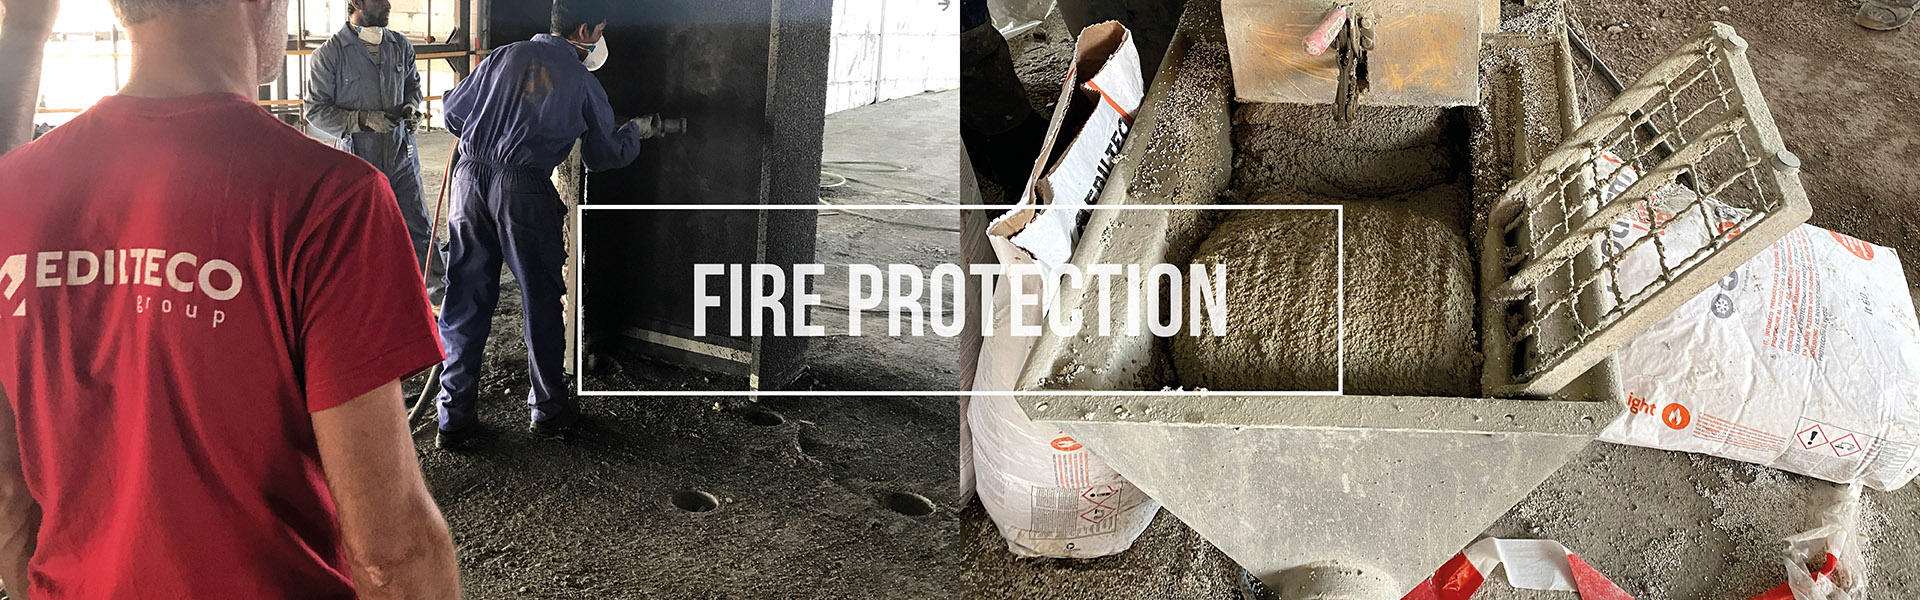 PROTHERM LIGHT - Fireproofing Division